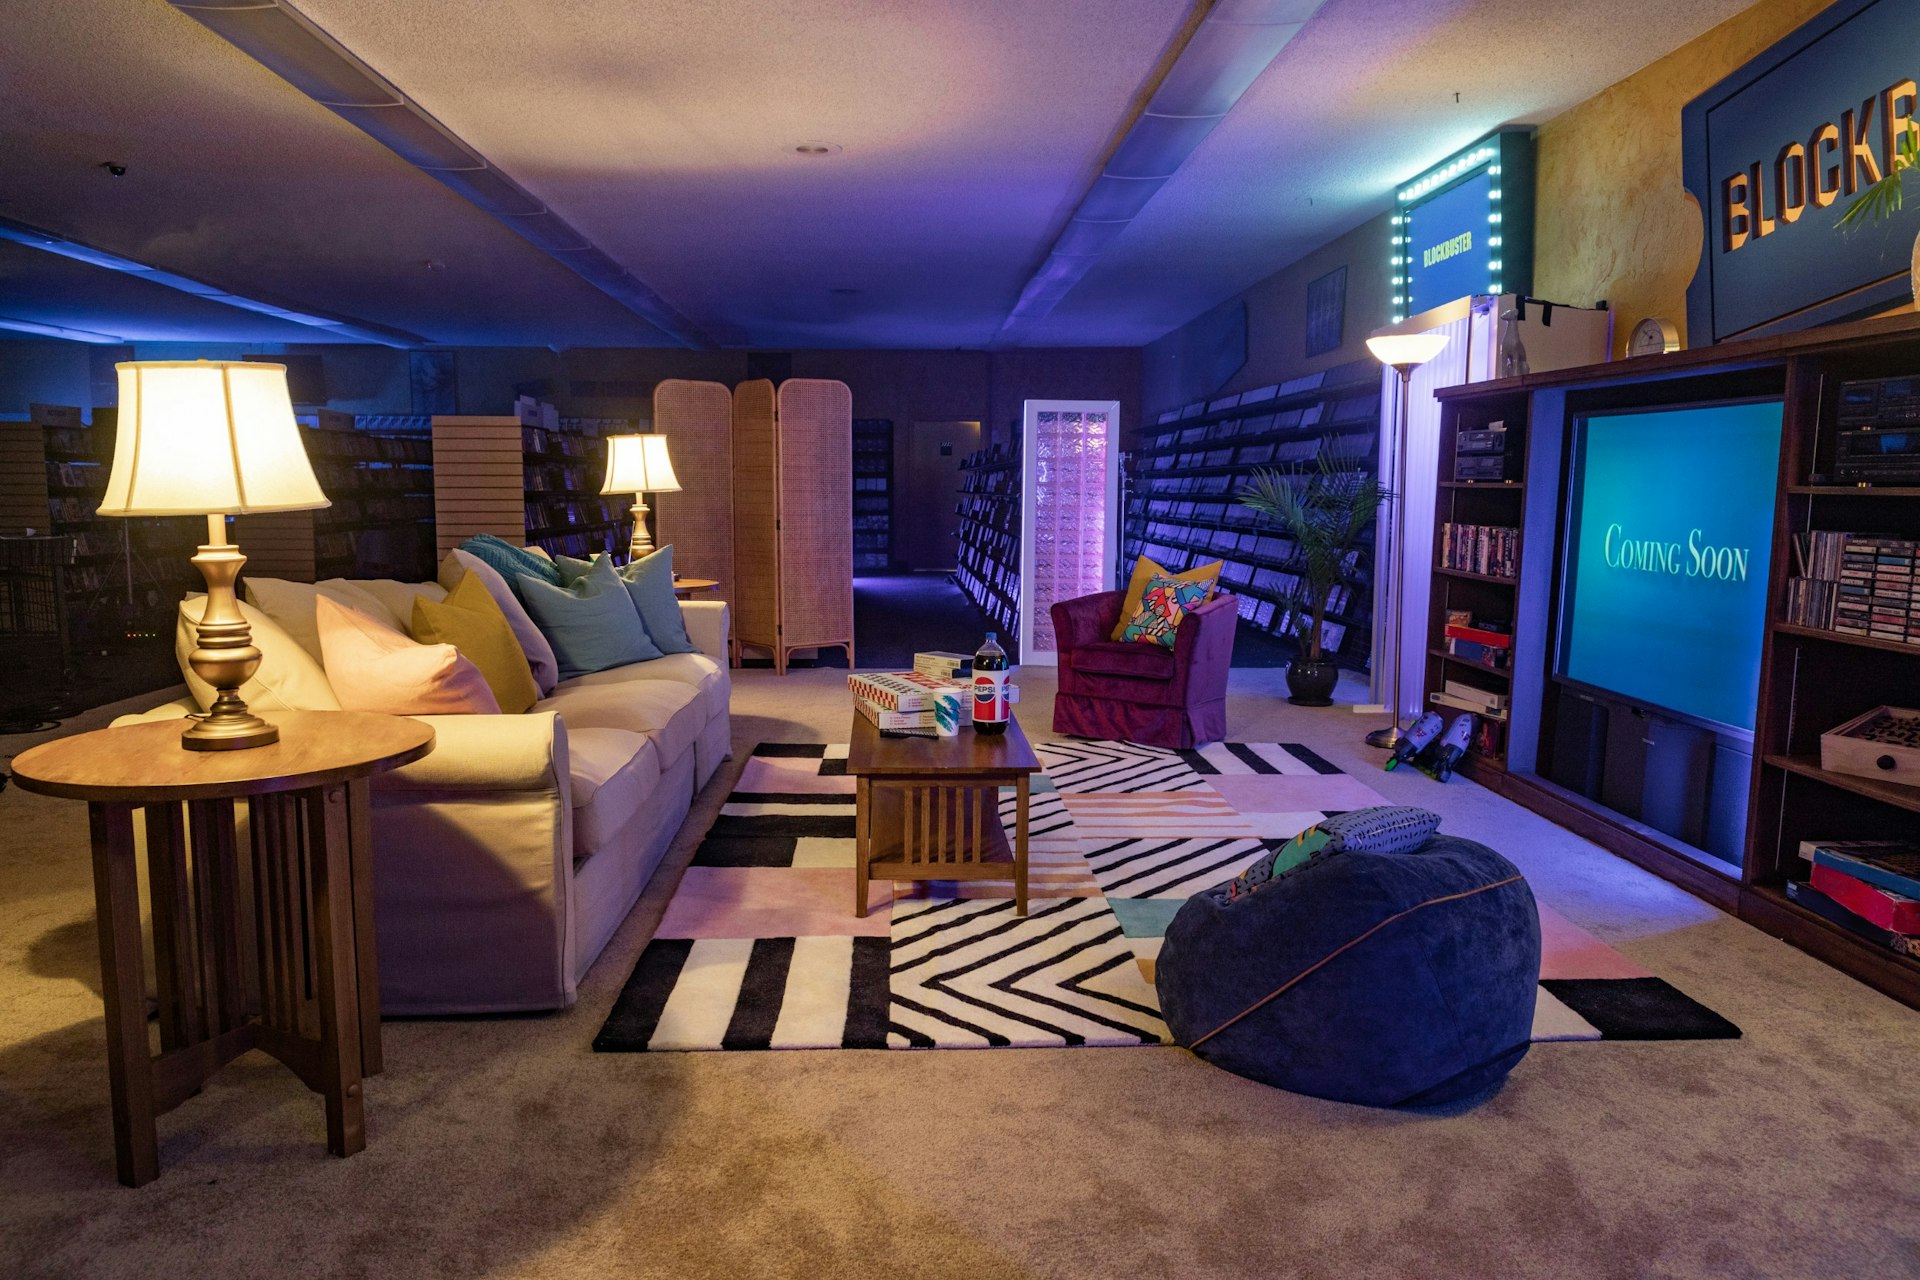 The living room at the Blockbuster Airbnb in Bend, Oregon